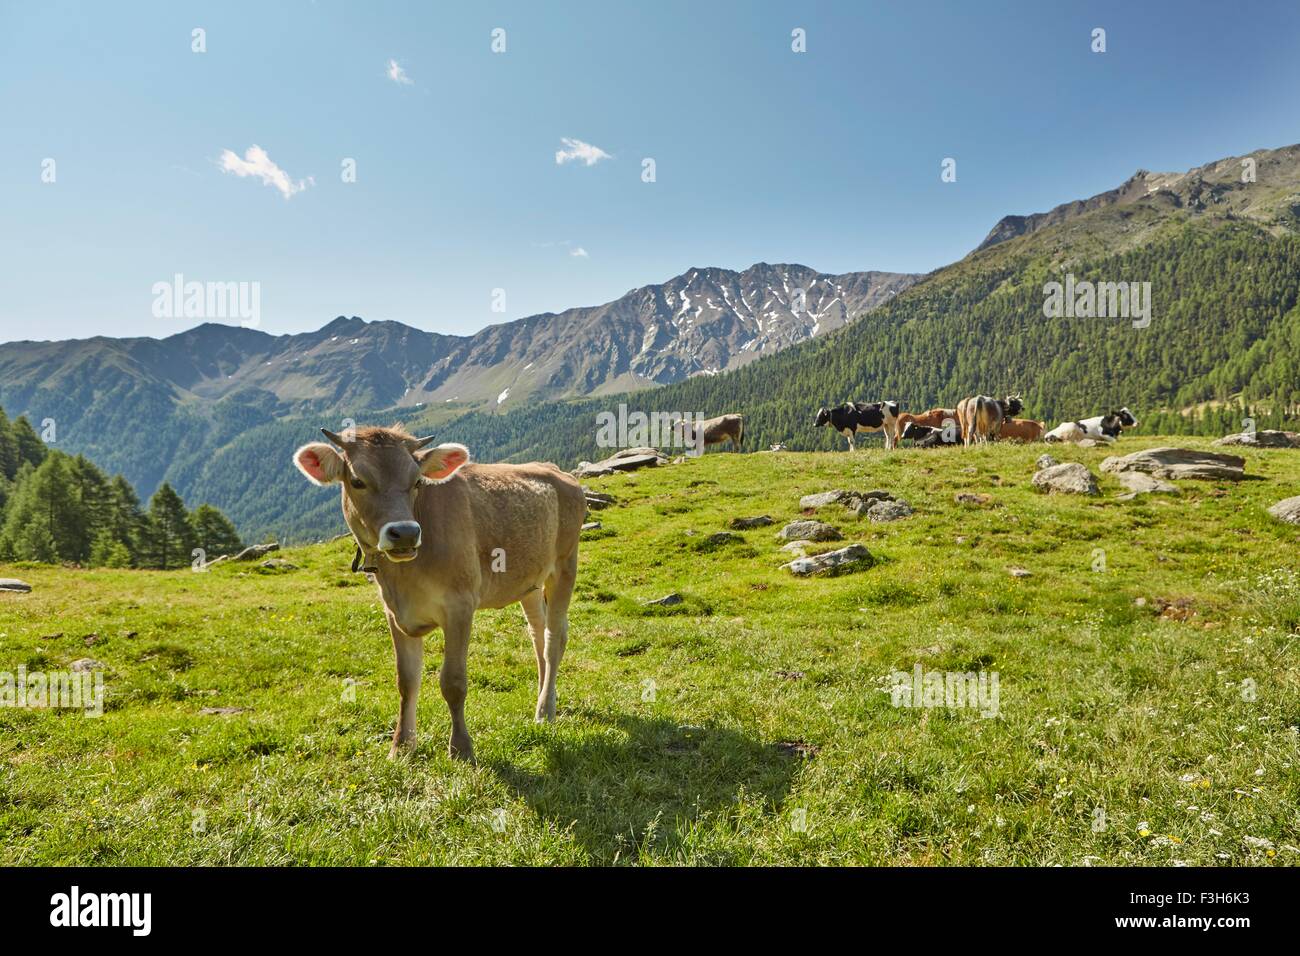 Portrait of cow in mountain landscape, Val Senales, South Tyrol, Italy Stock Photo